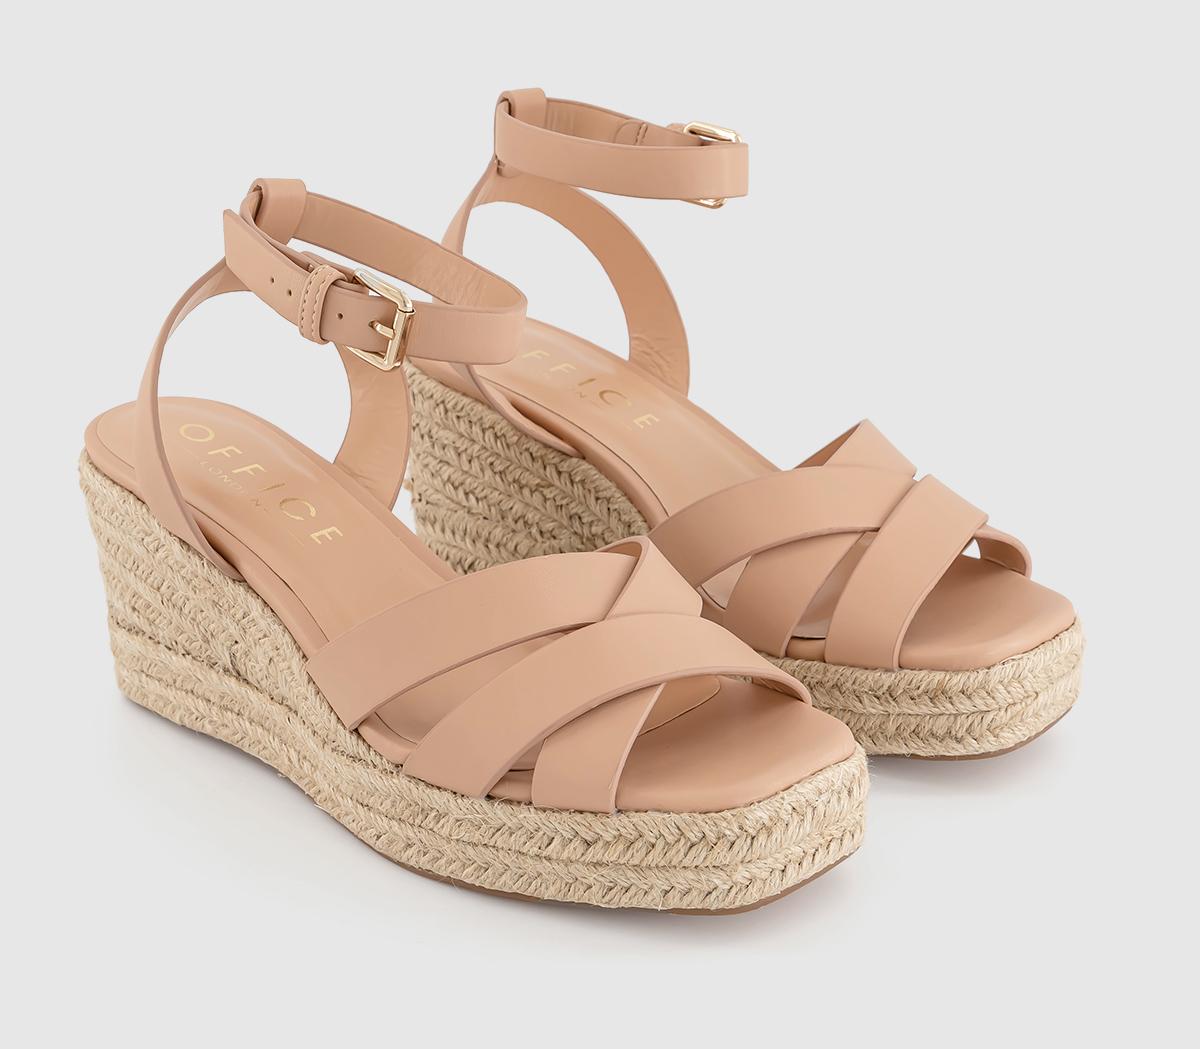 OFFICE Womens Martina Multi Strap Mid Espadrille Wedges Blush Pink, 3